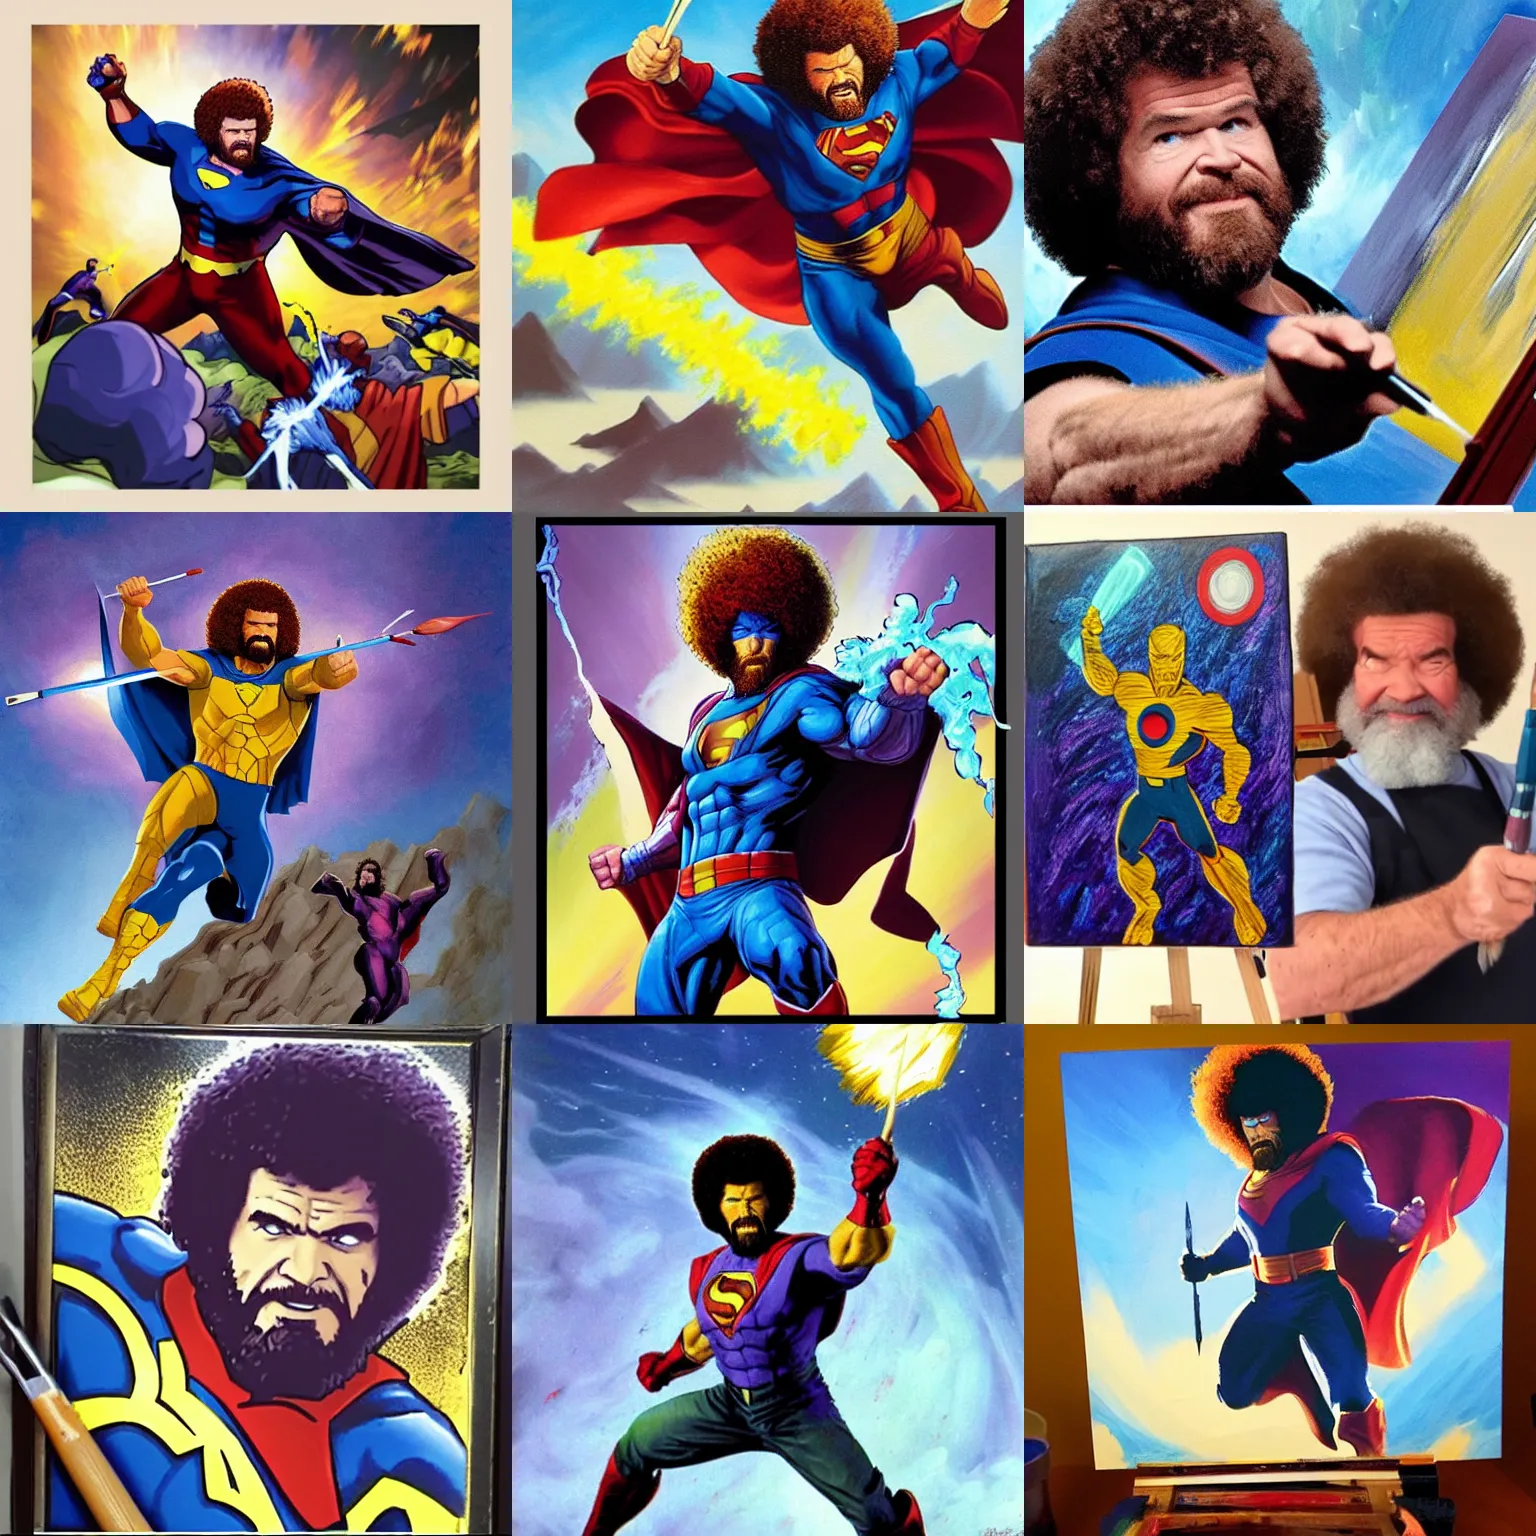 Prompt: action shot of superhero Bob Ross fighting Thanos using a paintbrush and palette